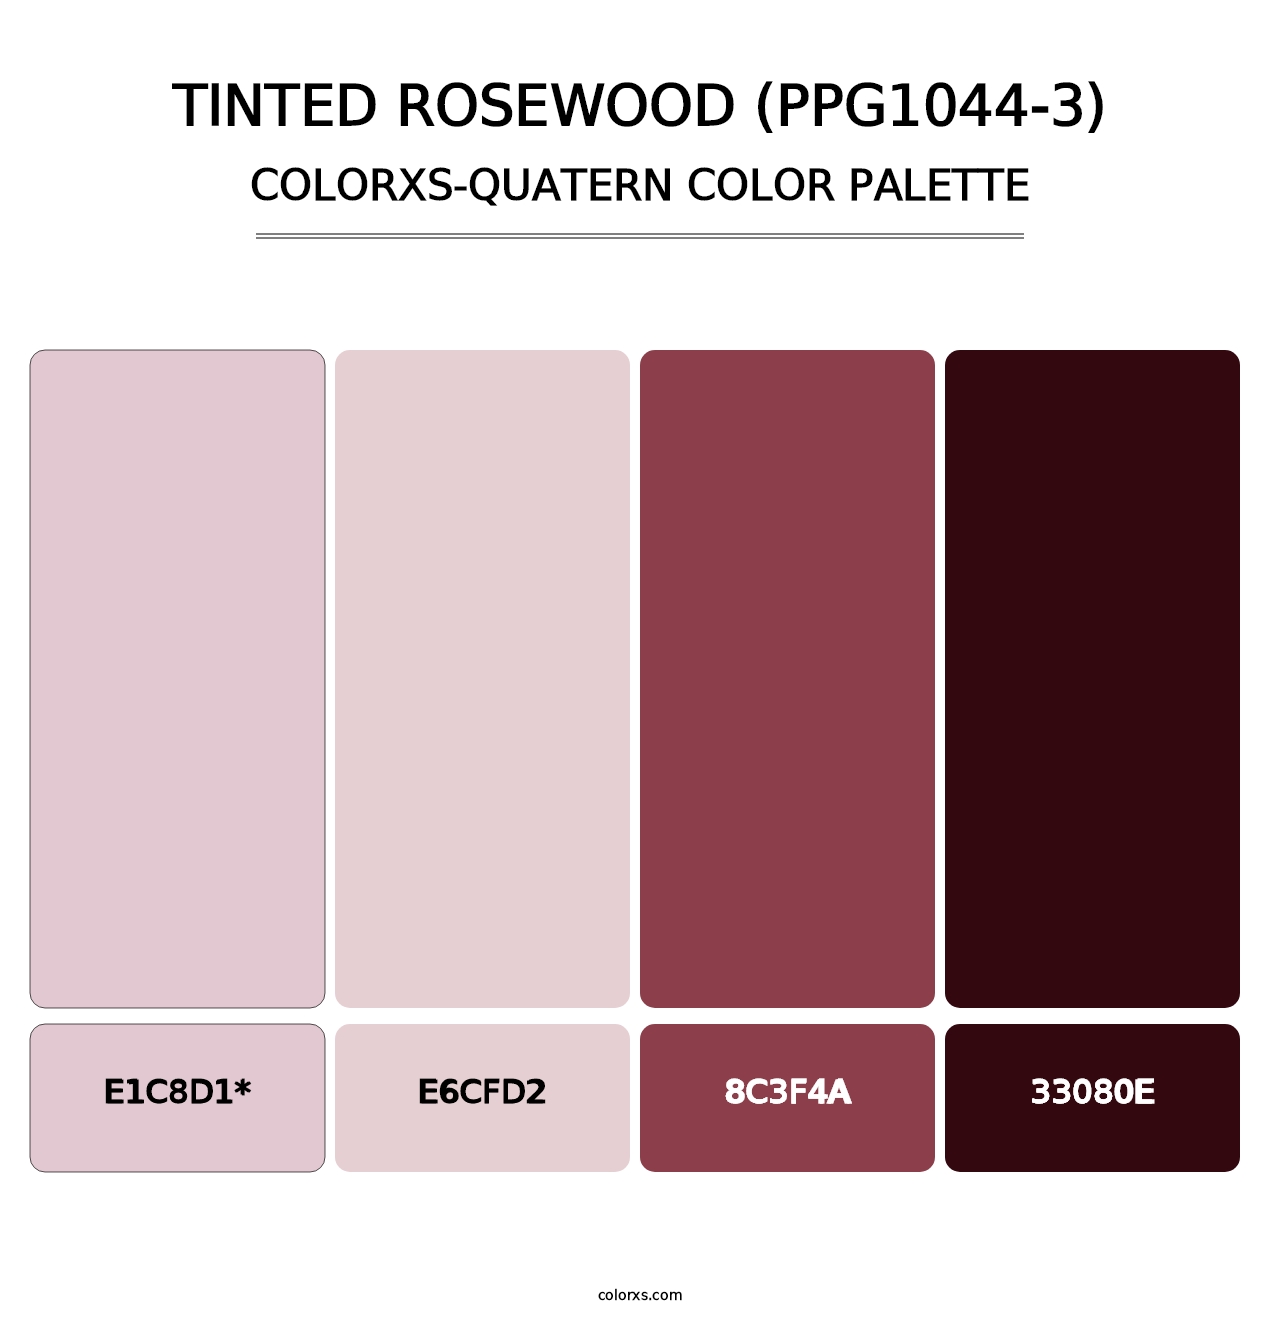 Tinted Rosewood (PPG1044-3) - Colorxs Quatern Palette